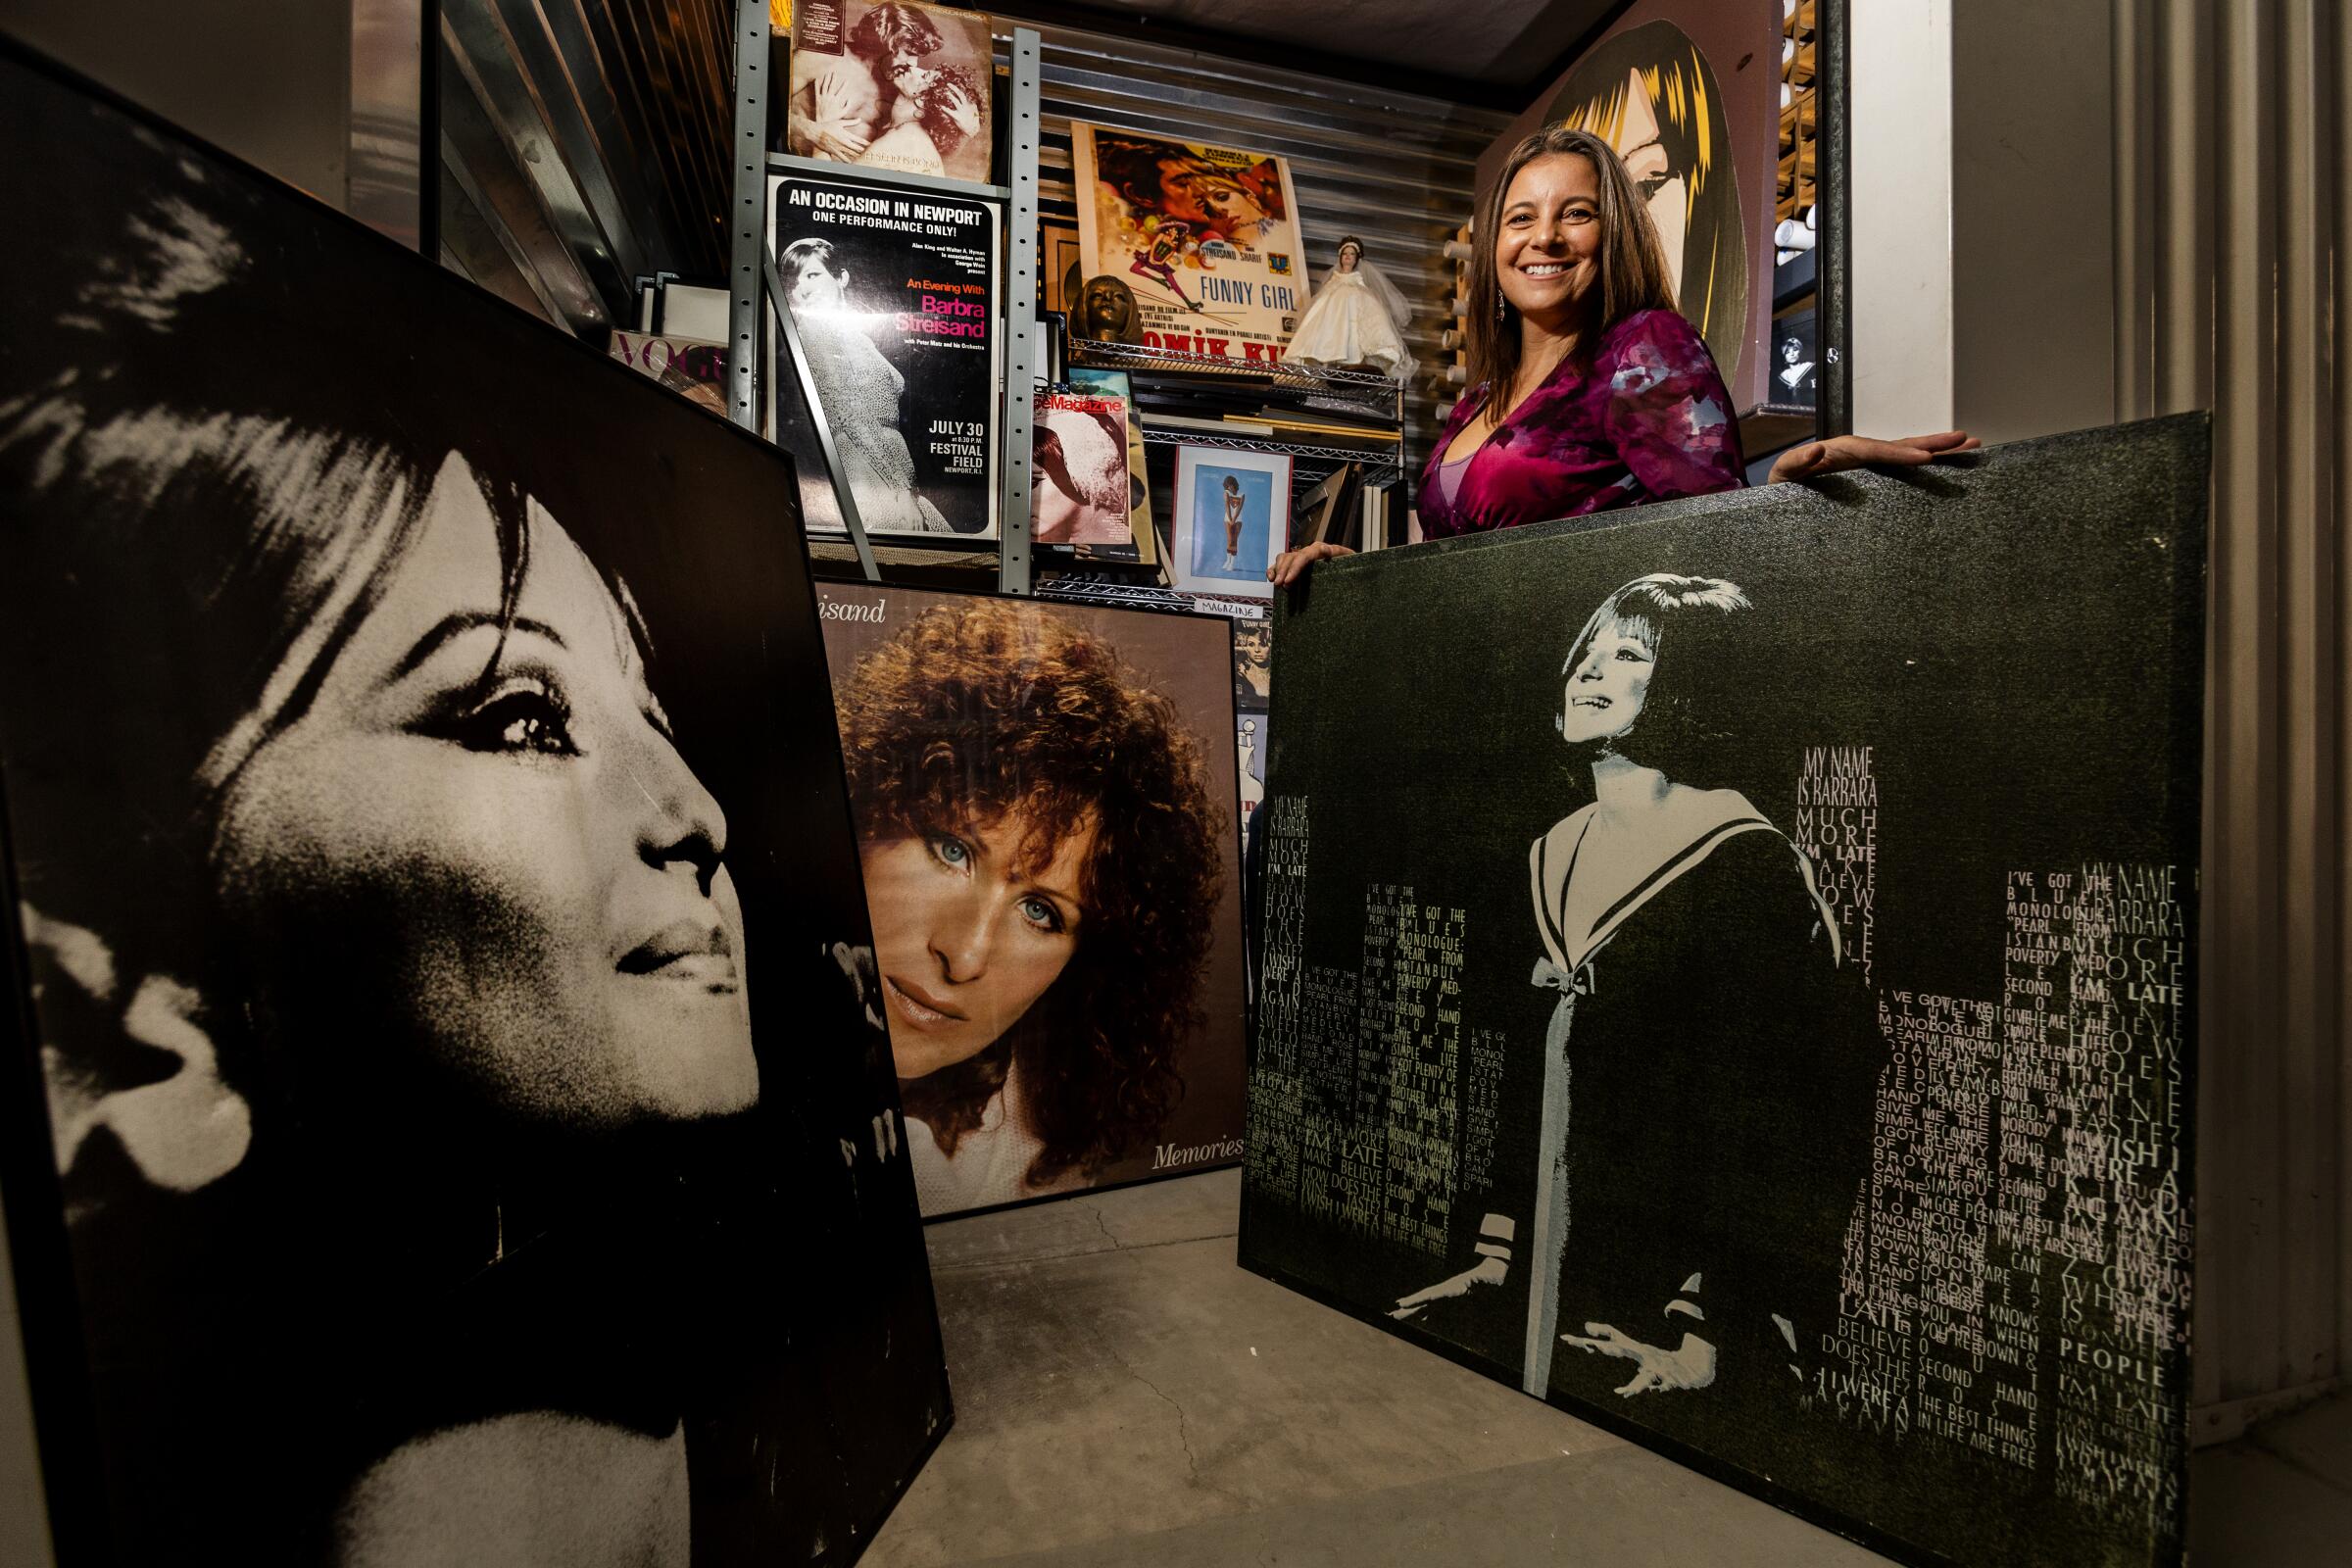 Mara Papalas stands amidst just some of the hundreds of Barbra Streisand memorabilia inside a storage container.